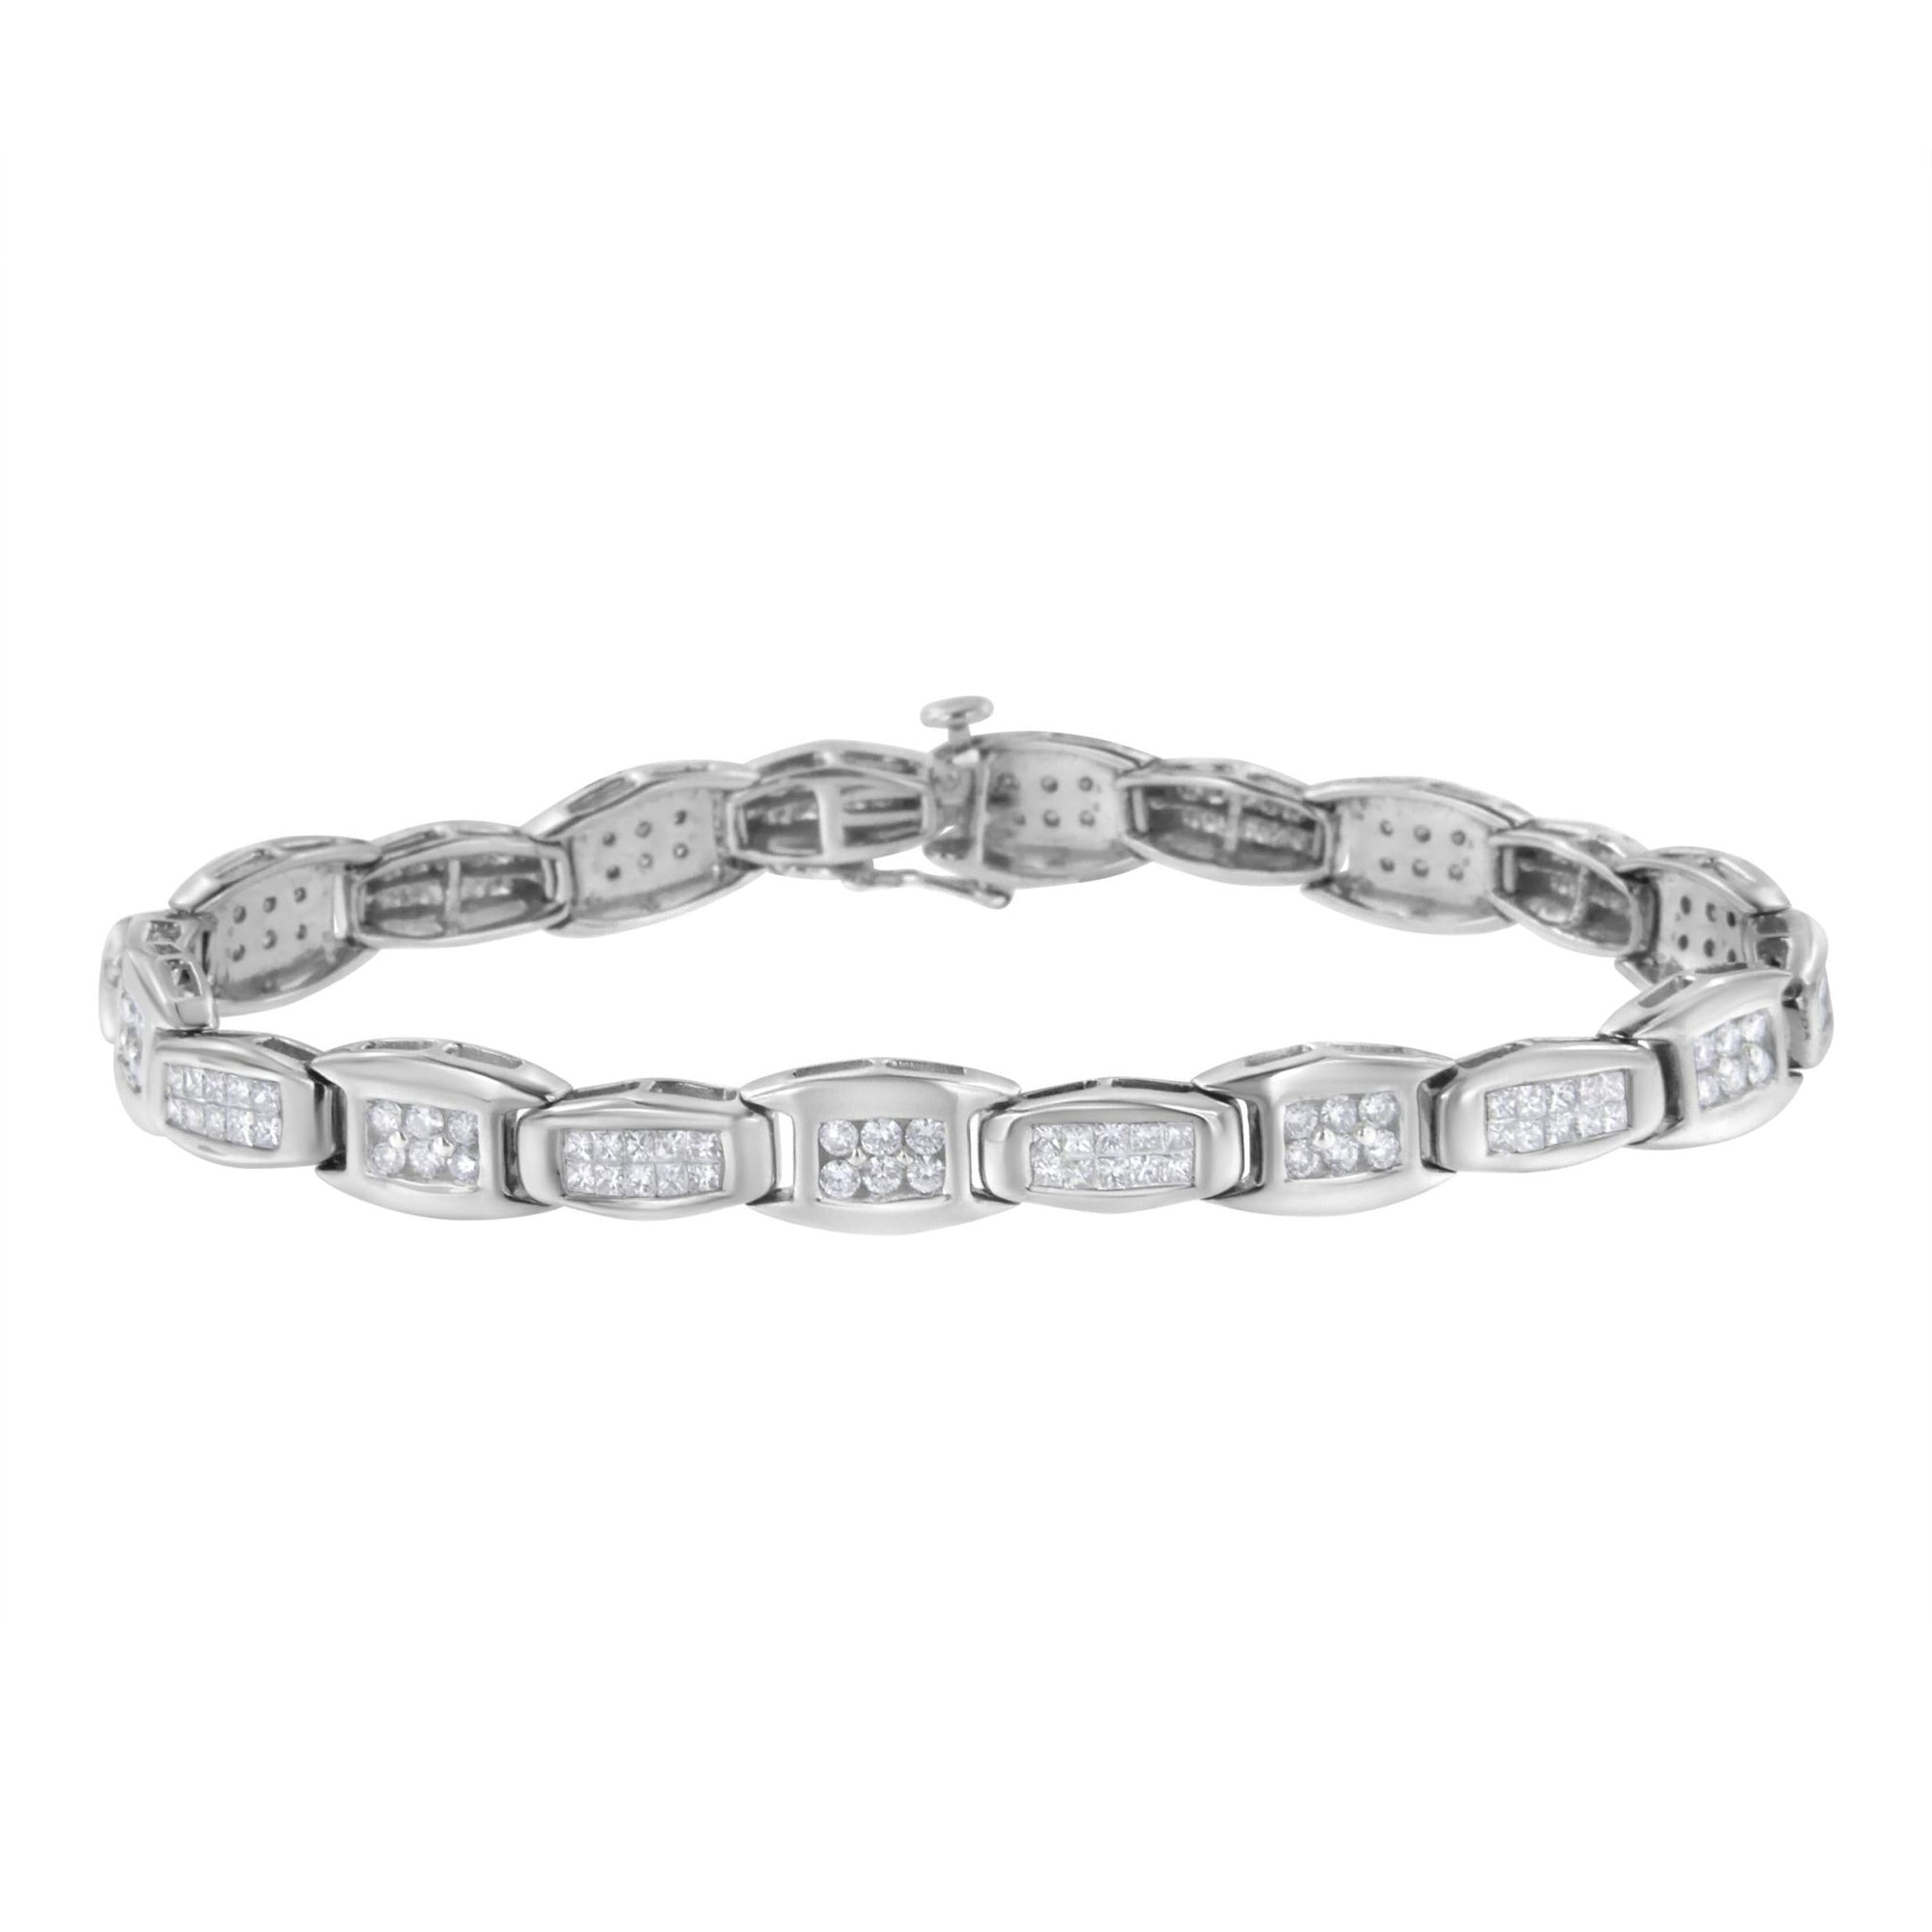 14K White Gold 2-1/2 Cttw Round-Brilliant & Baguette Cut Diamond 7" Alternating Flared Links Tennis Bracelet (H-I Color, SI1-SI2 Clarity) - LinkagejewelrydesignLinkagejewelrydesign